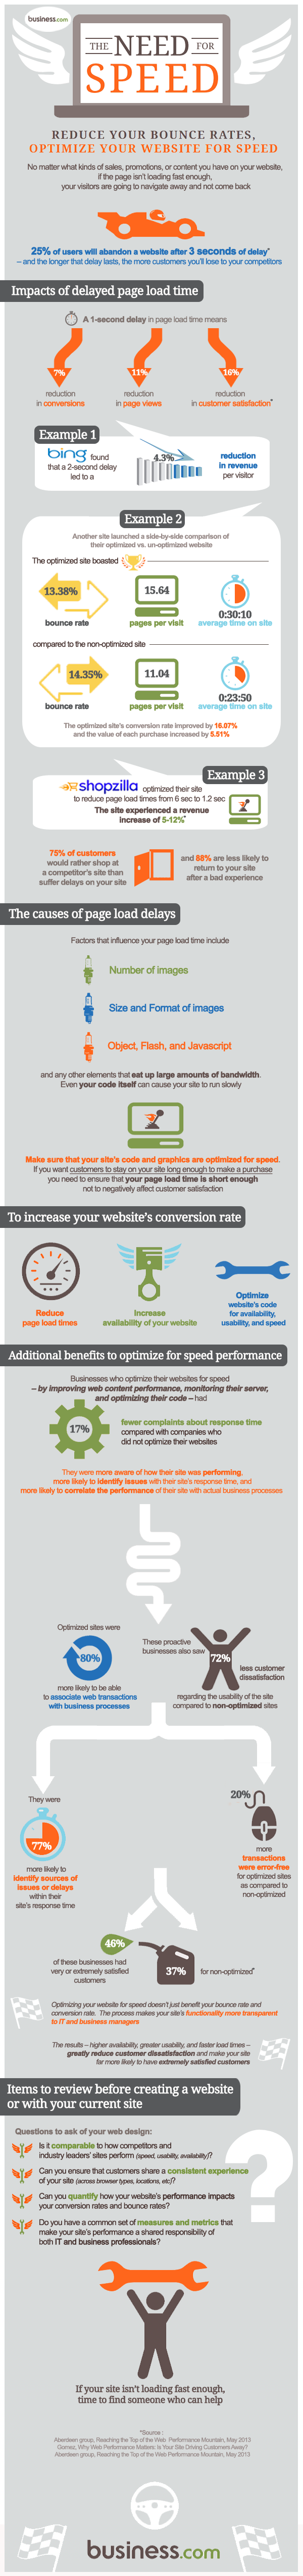 The Need for Speed: Increasing Sales with Site Optimization